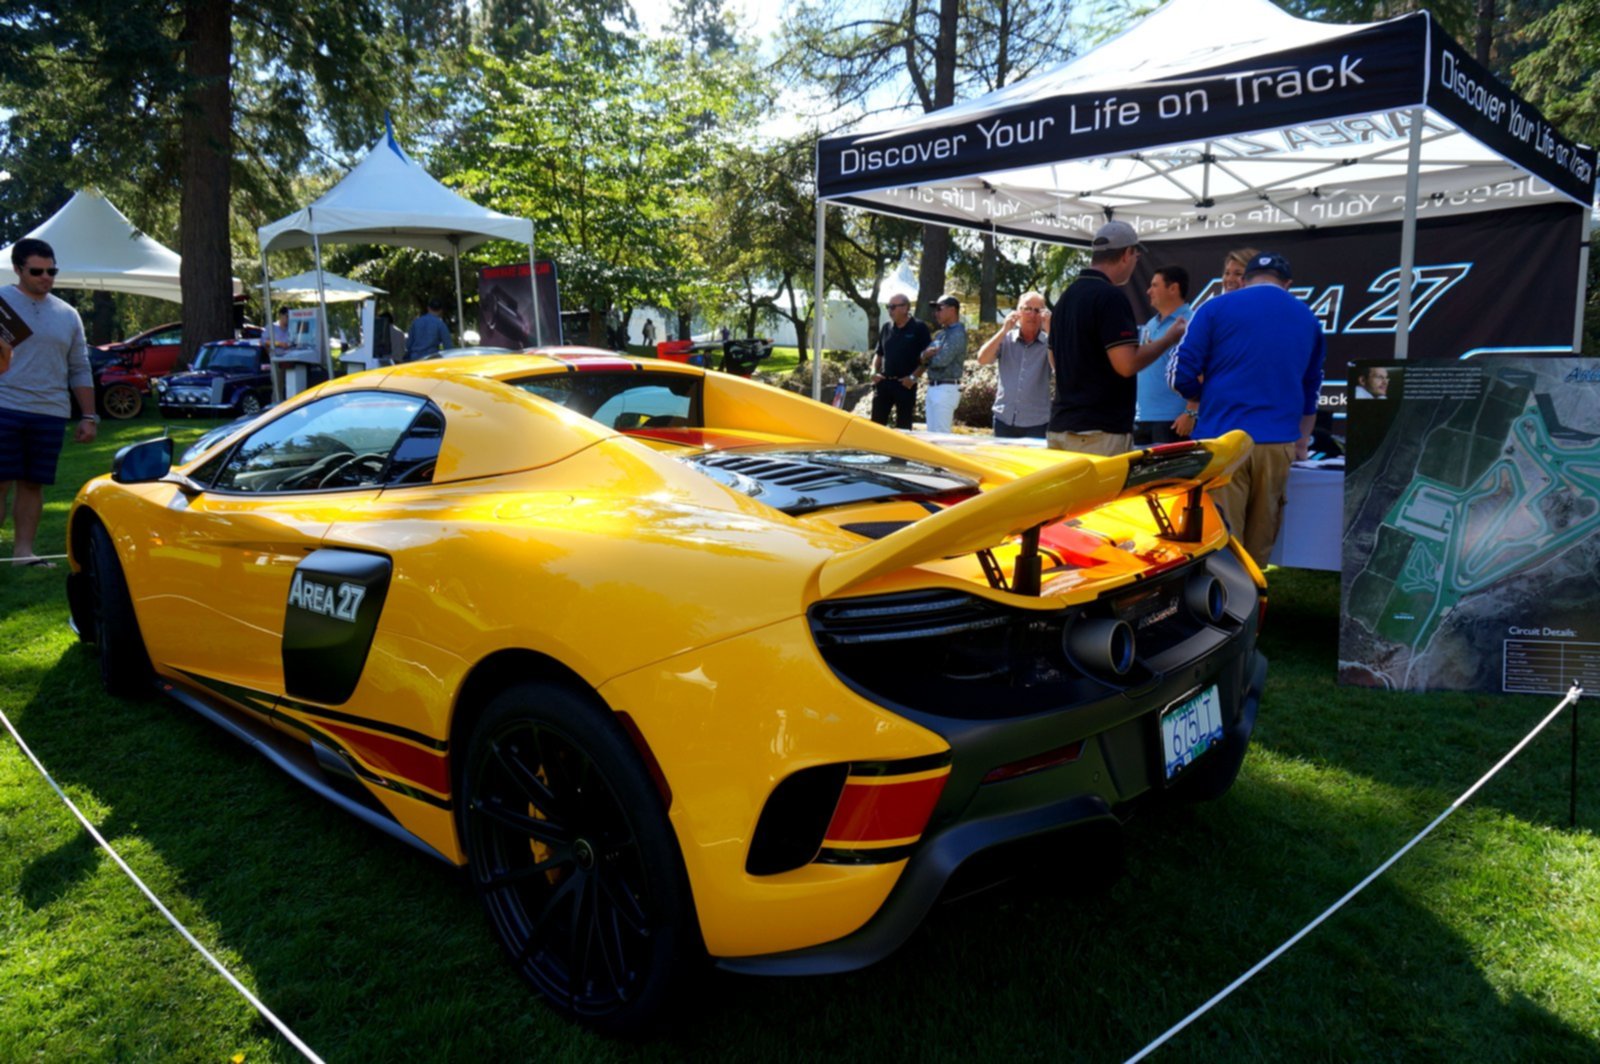 Area 27 McLaren at the Luxury Supercar Weekend Vancouver